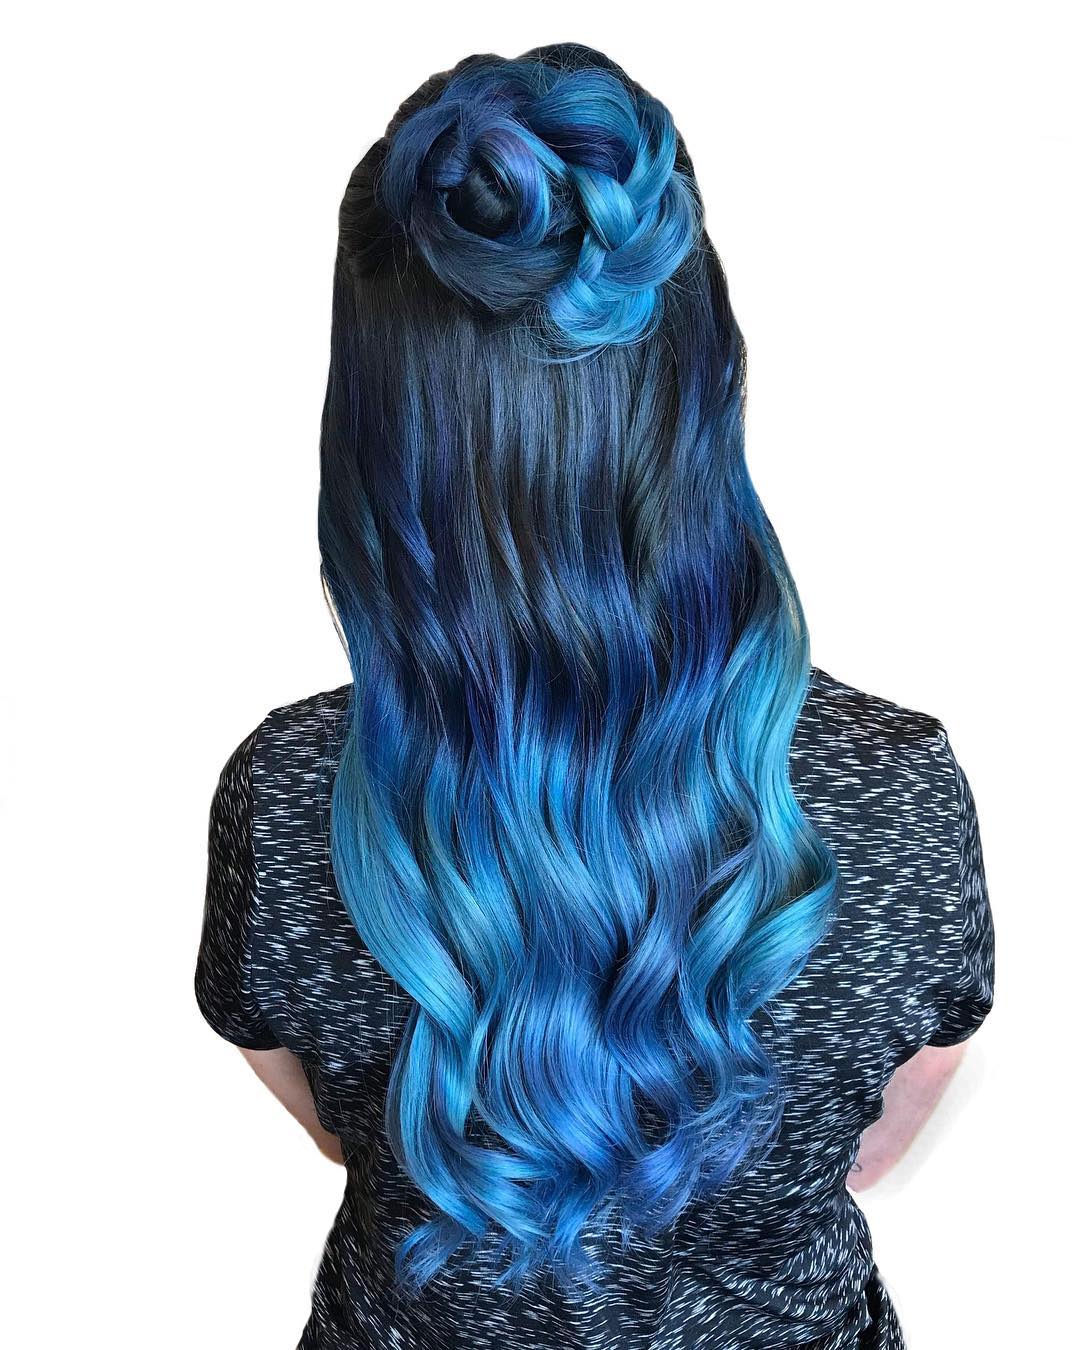 Black to Blue Ombre Hair with Braided Top Knot